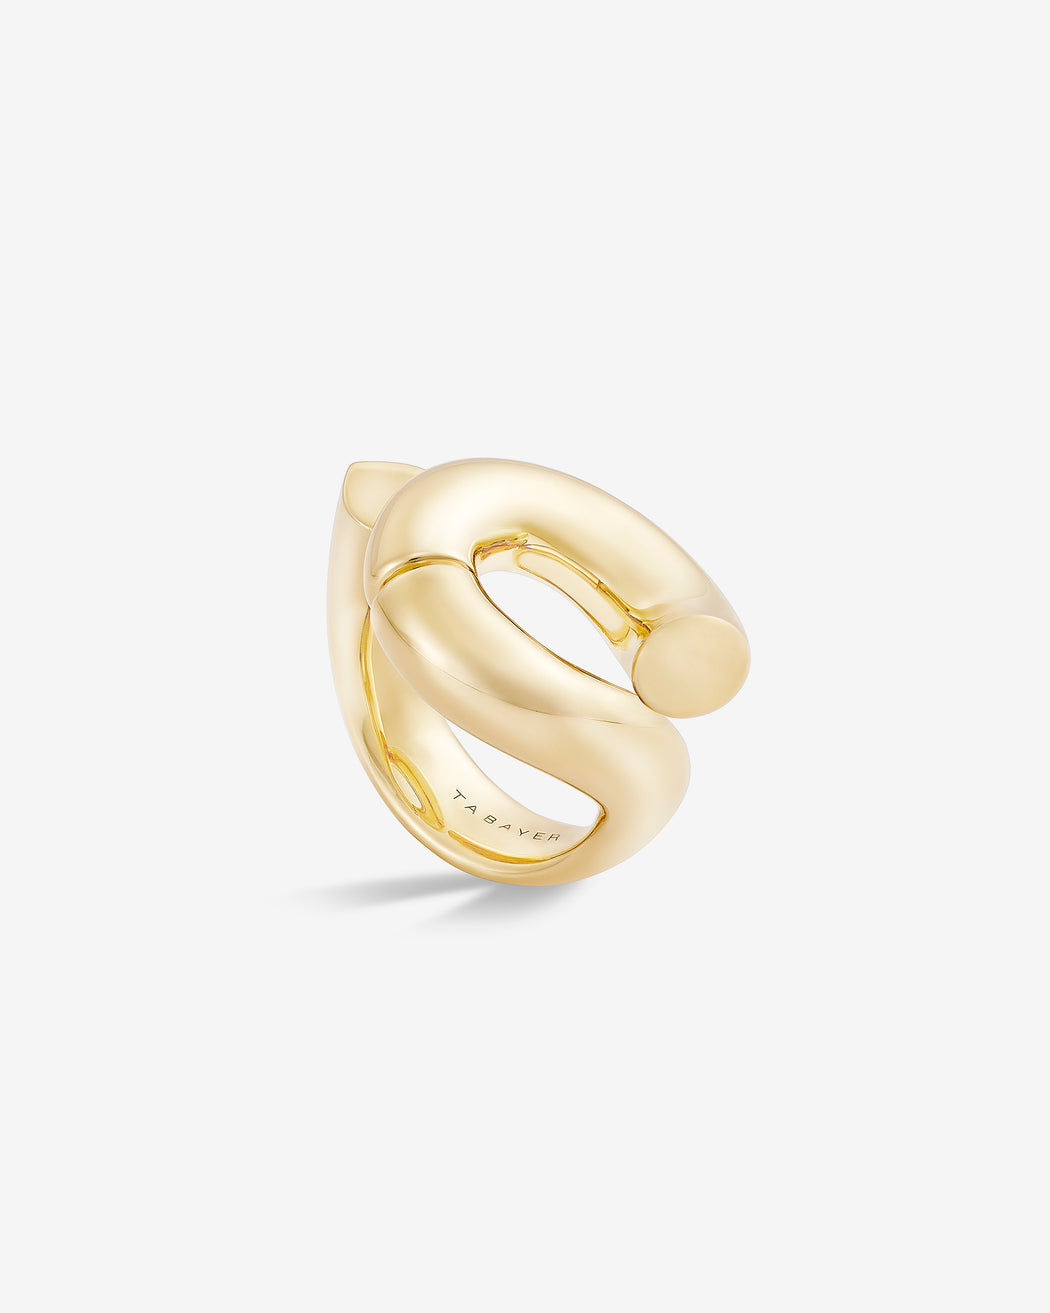 Oera ring 18k Fairmined yellow gold, Tabayer ethical fine jewelry